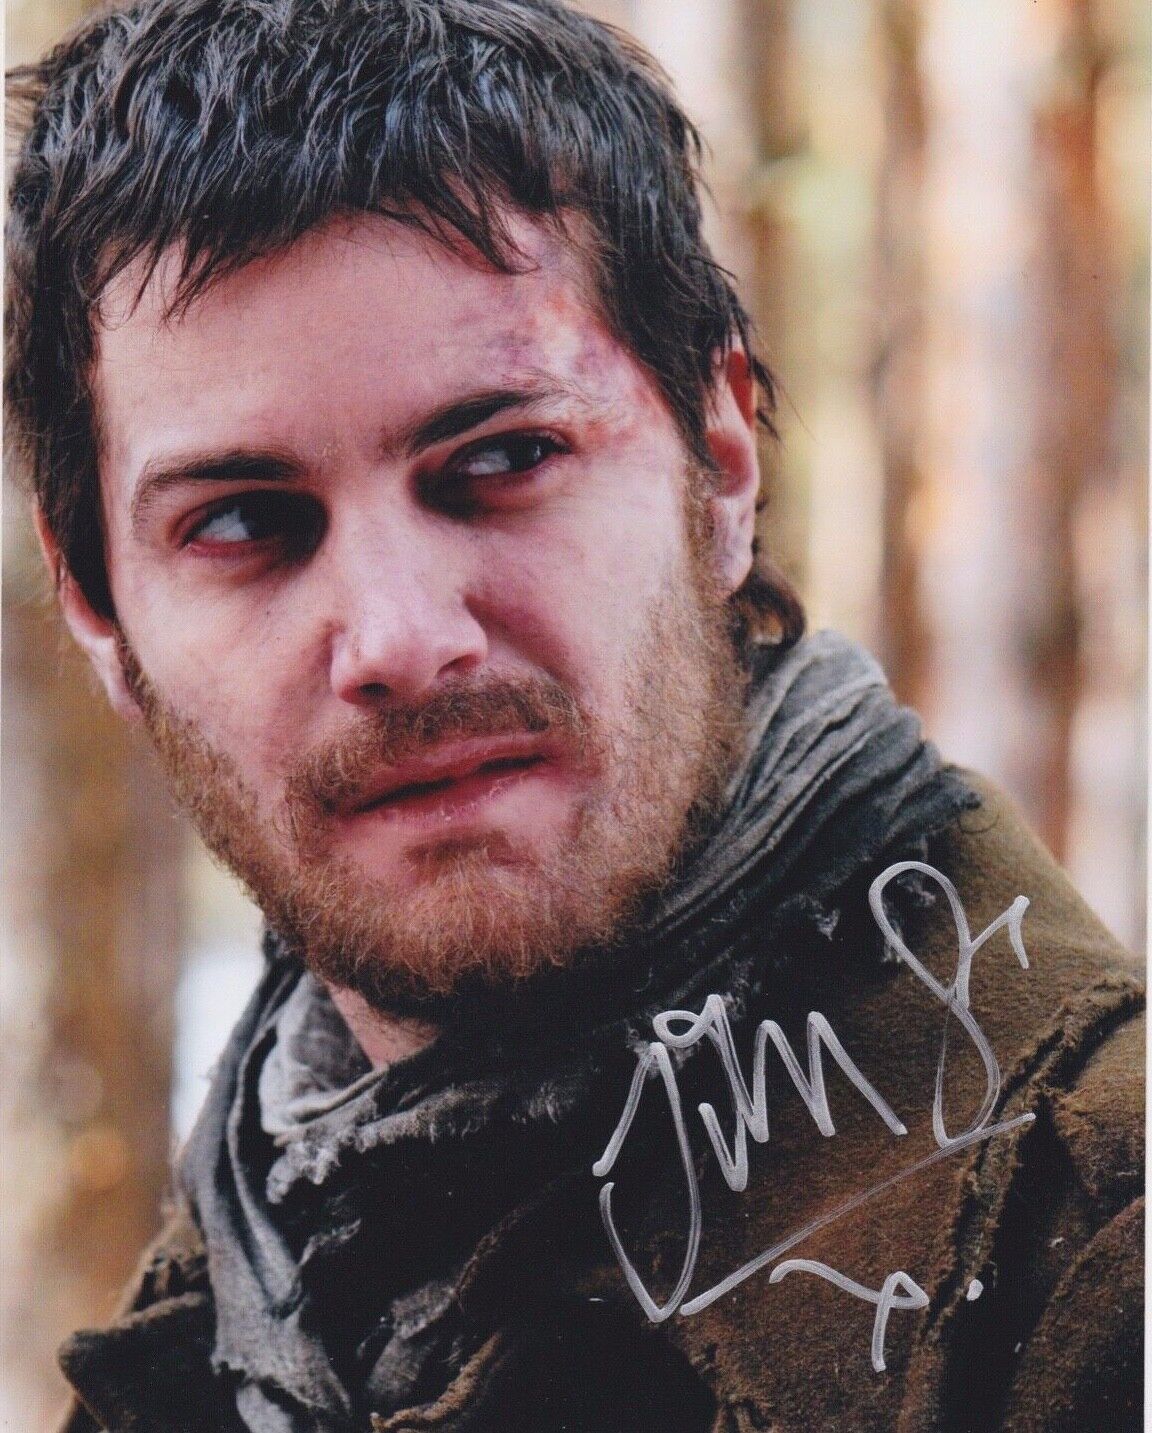 Signed Original Color Photo Poster painting of Jim Sturgess of The Way Back